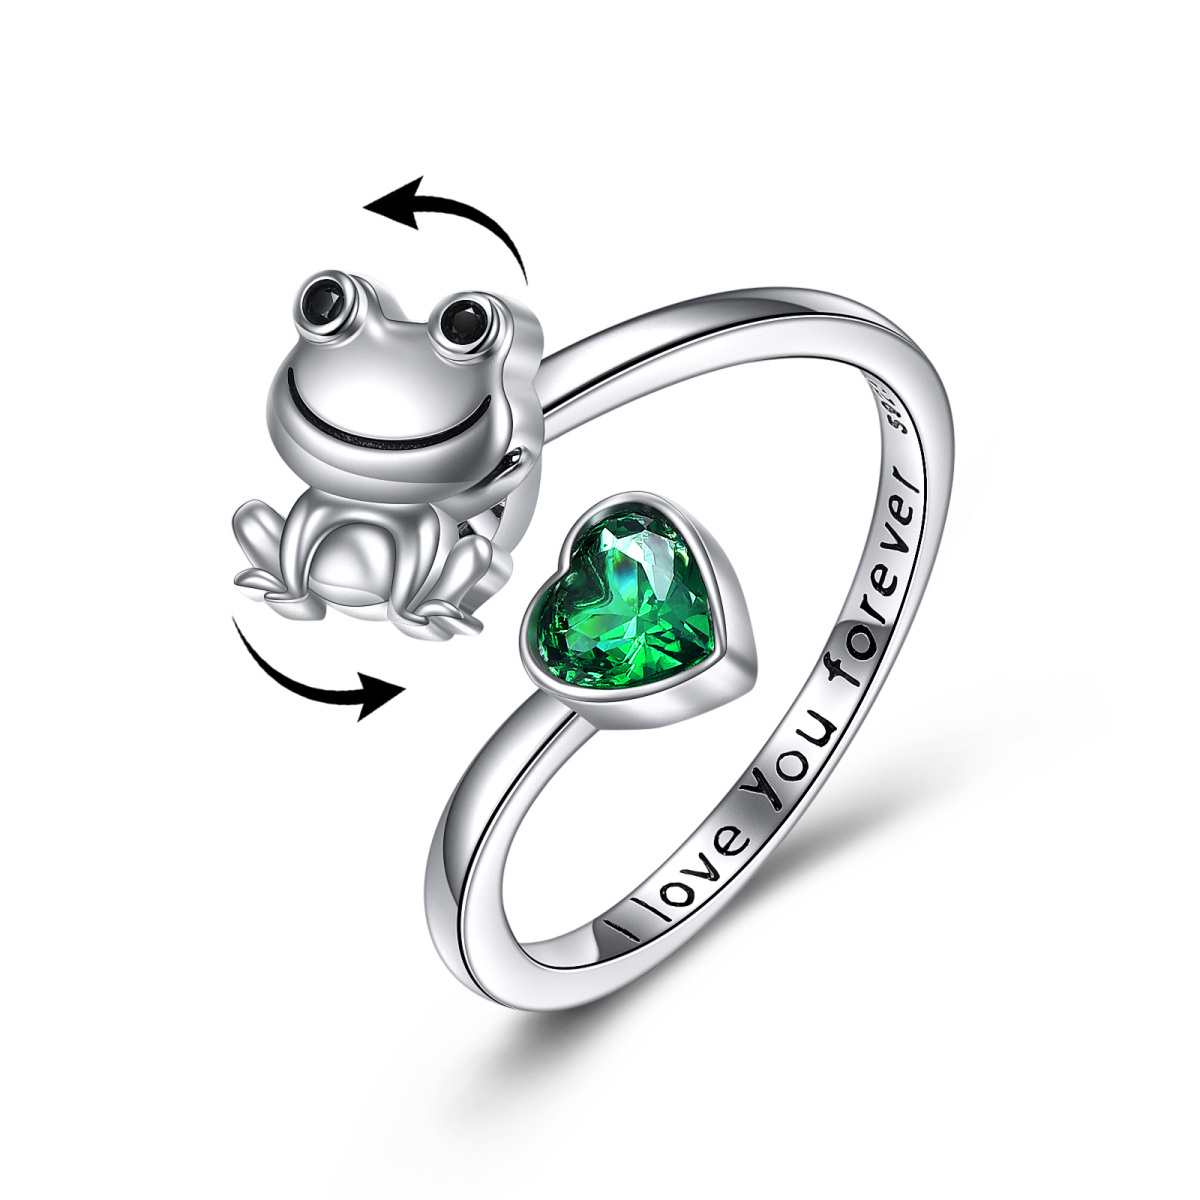 Sterling Silver Heart Shaped Cubic Zirconia Frog & Heart Spinner Ring with Engraved Word-1